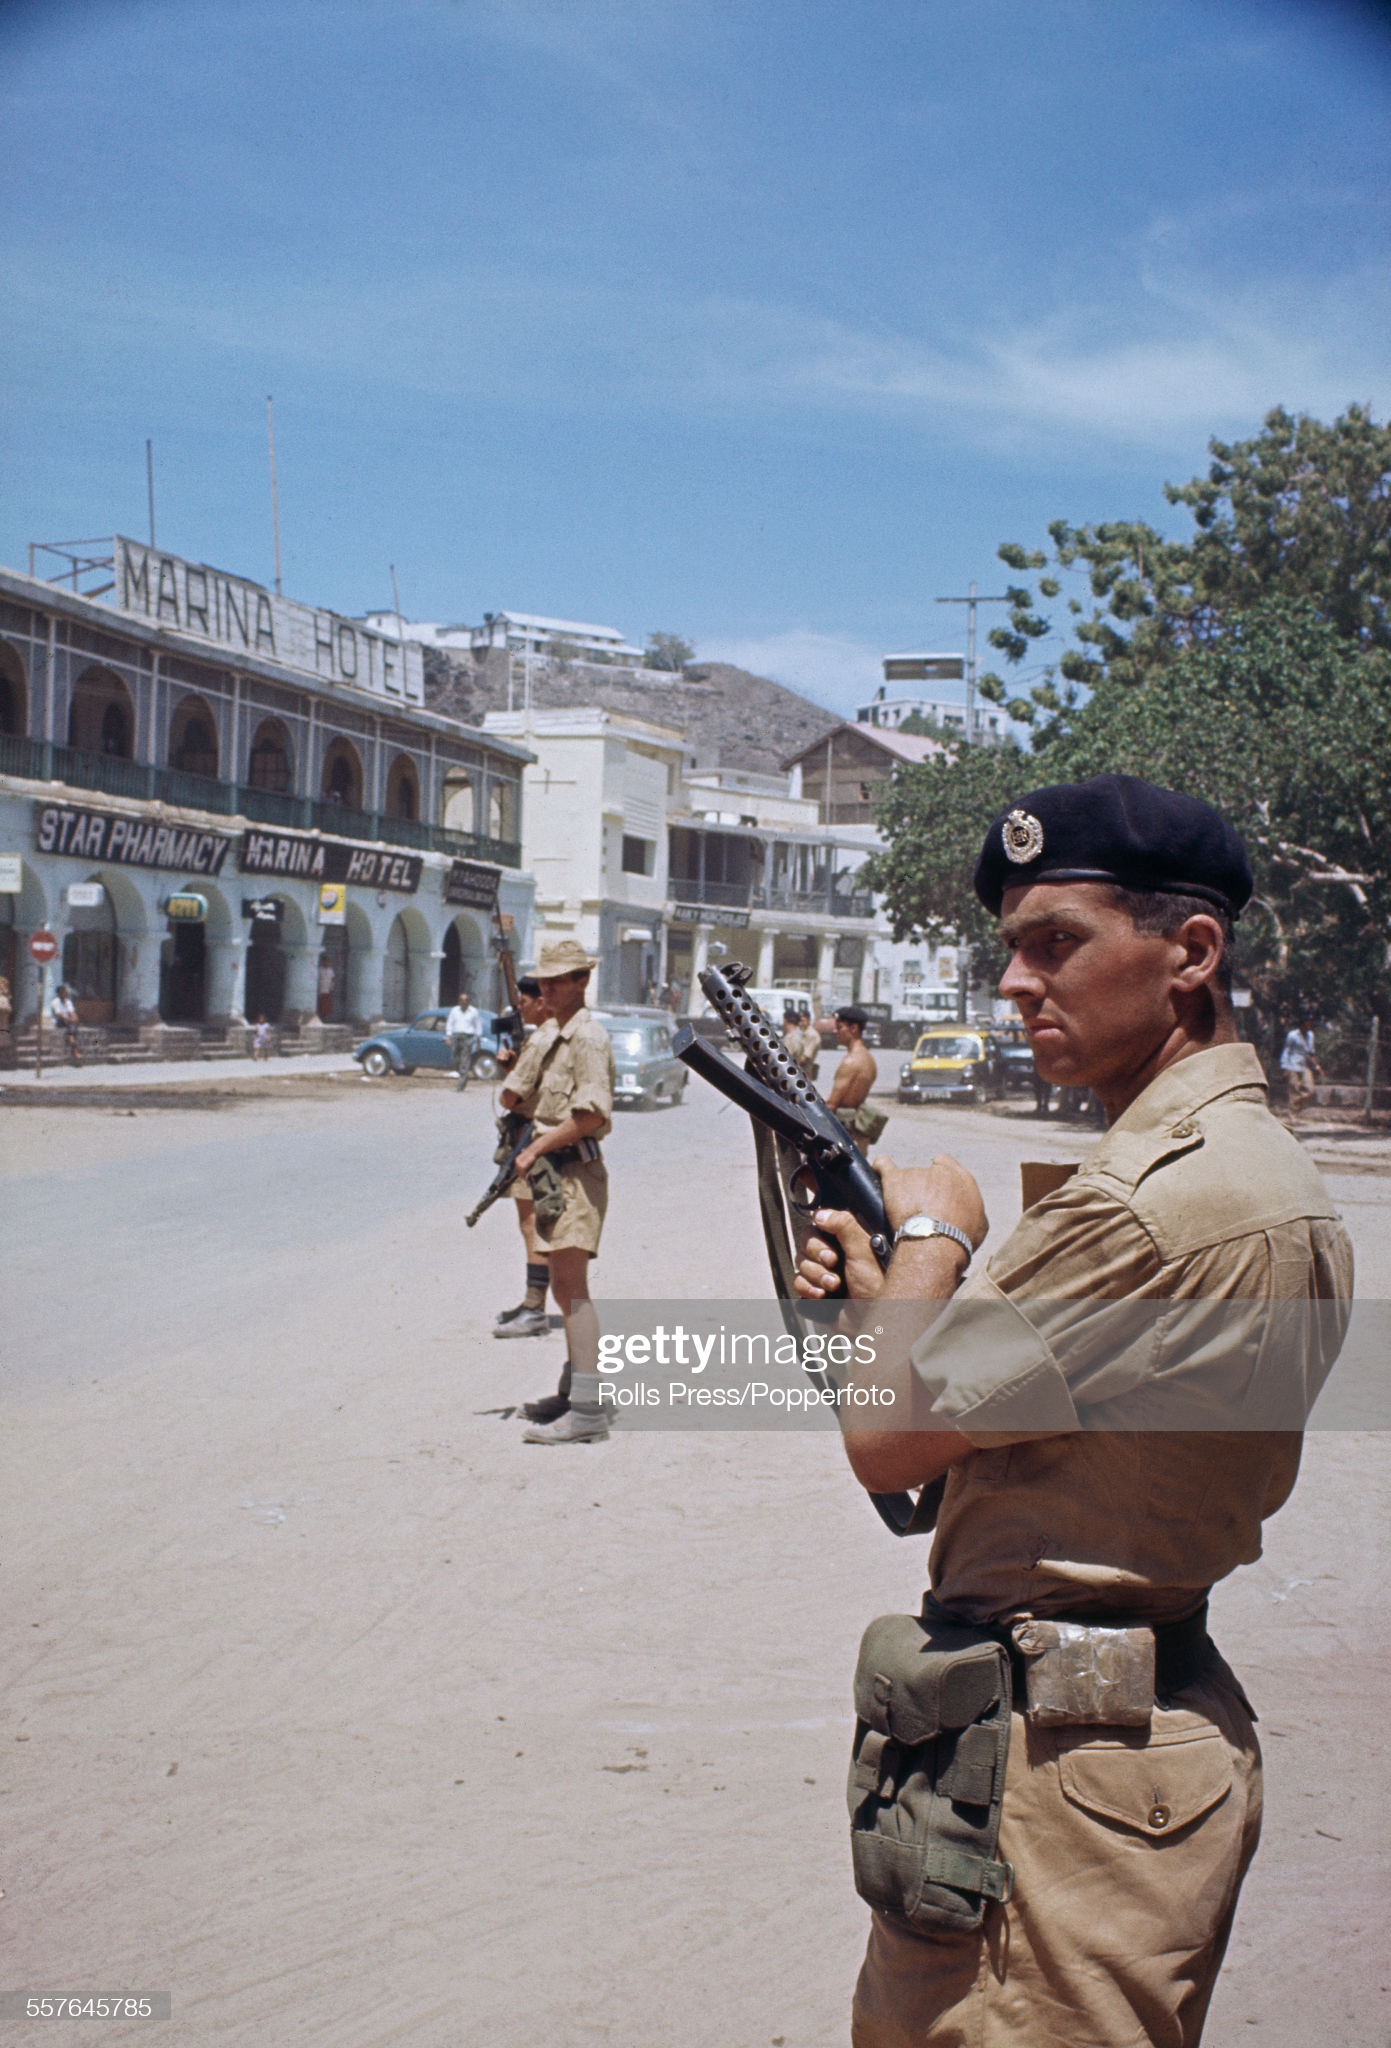 view-of-armed-british-soldiers-on-patrol-on-the-streets-of-aden-town-picture-id557645785